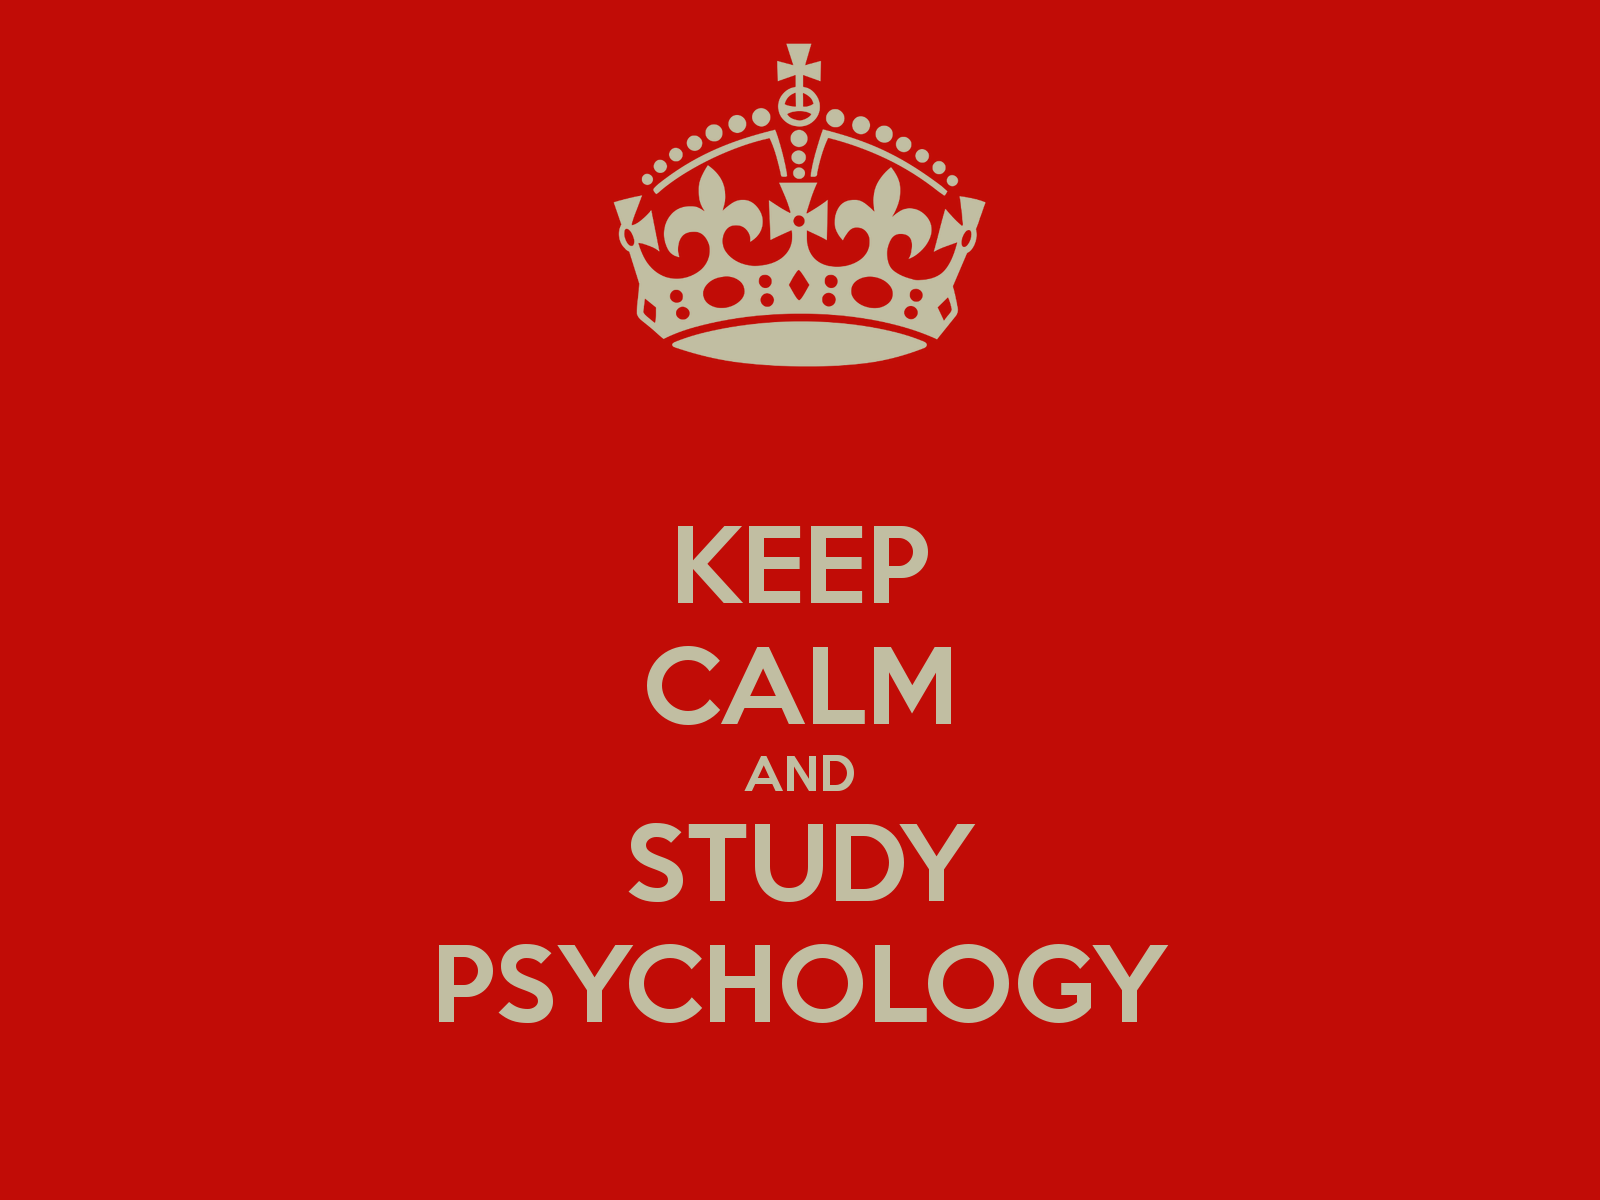 Keep calm and study psychology